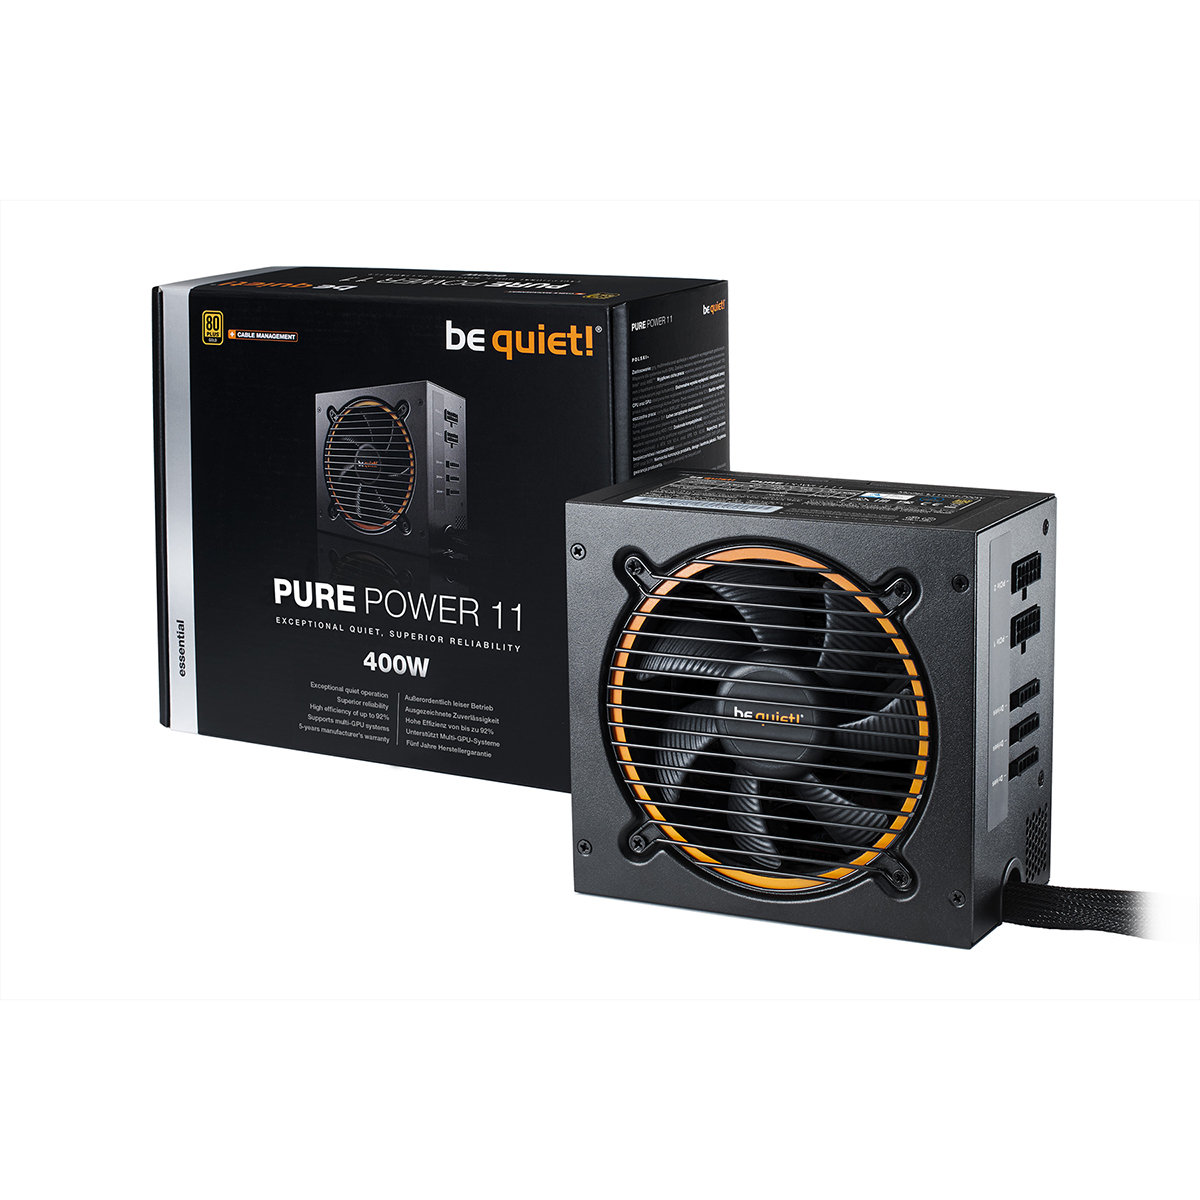 be quiet! - be quiet Pure Power 11 400W 80 Plus Gold Modular Power Supply